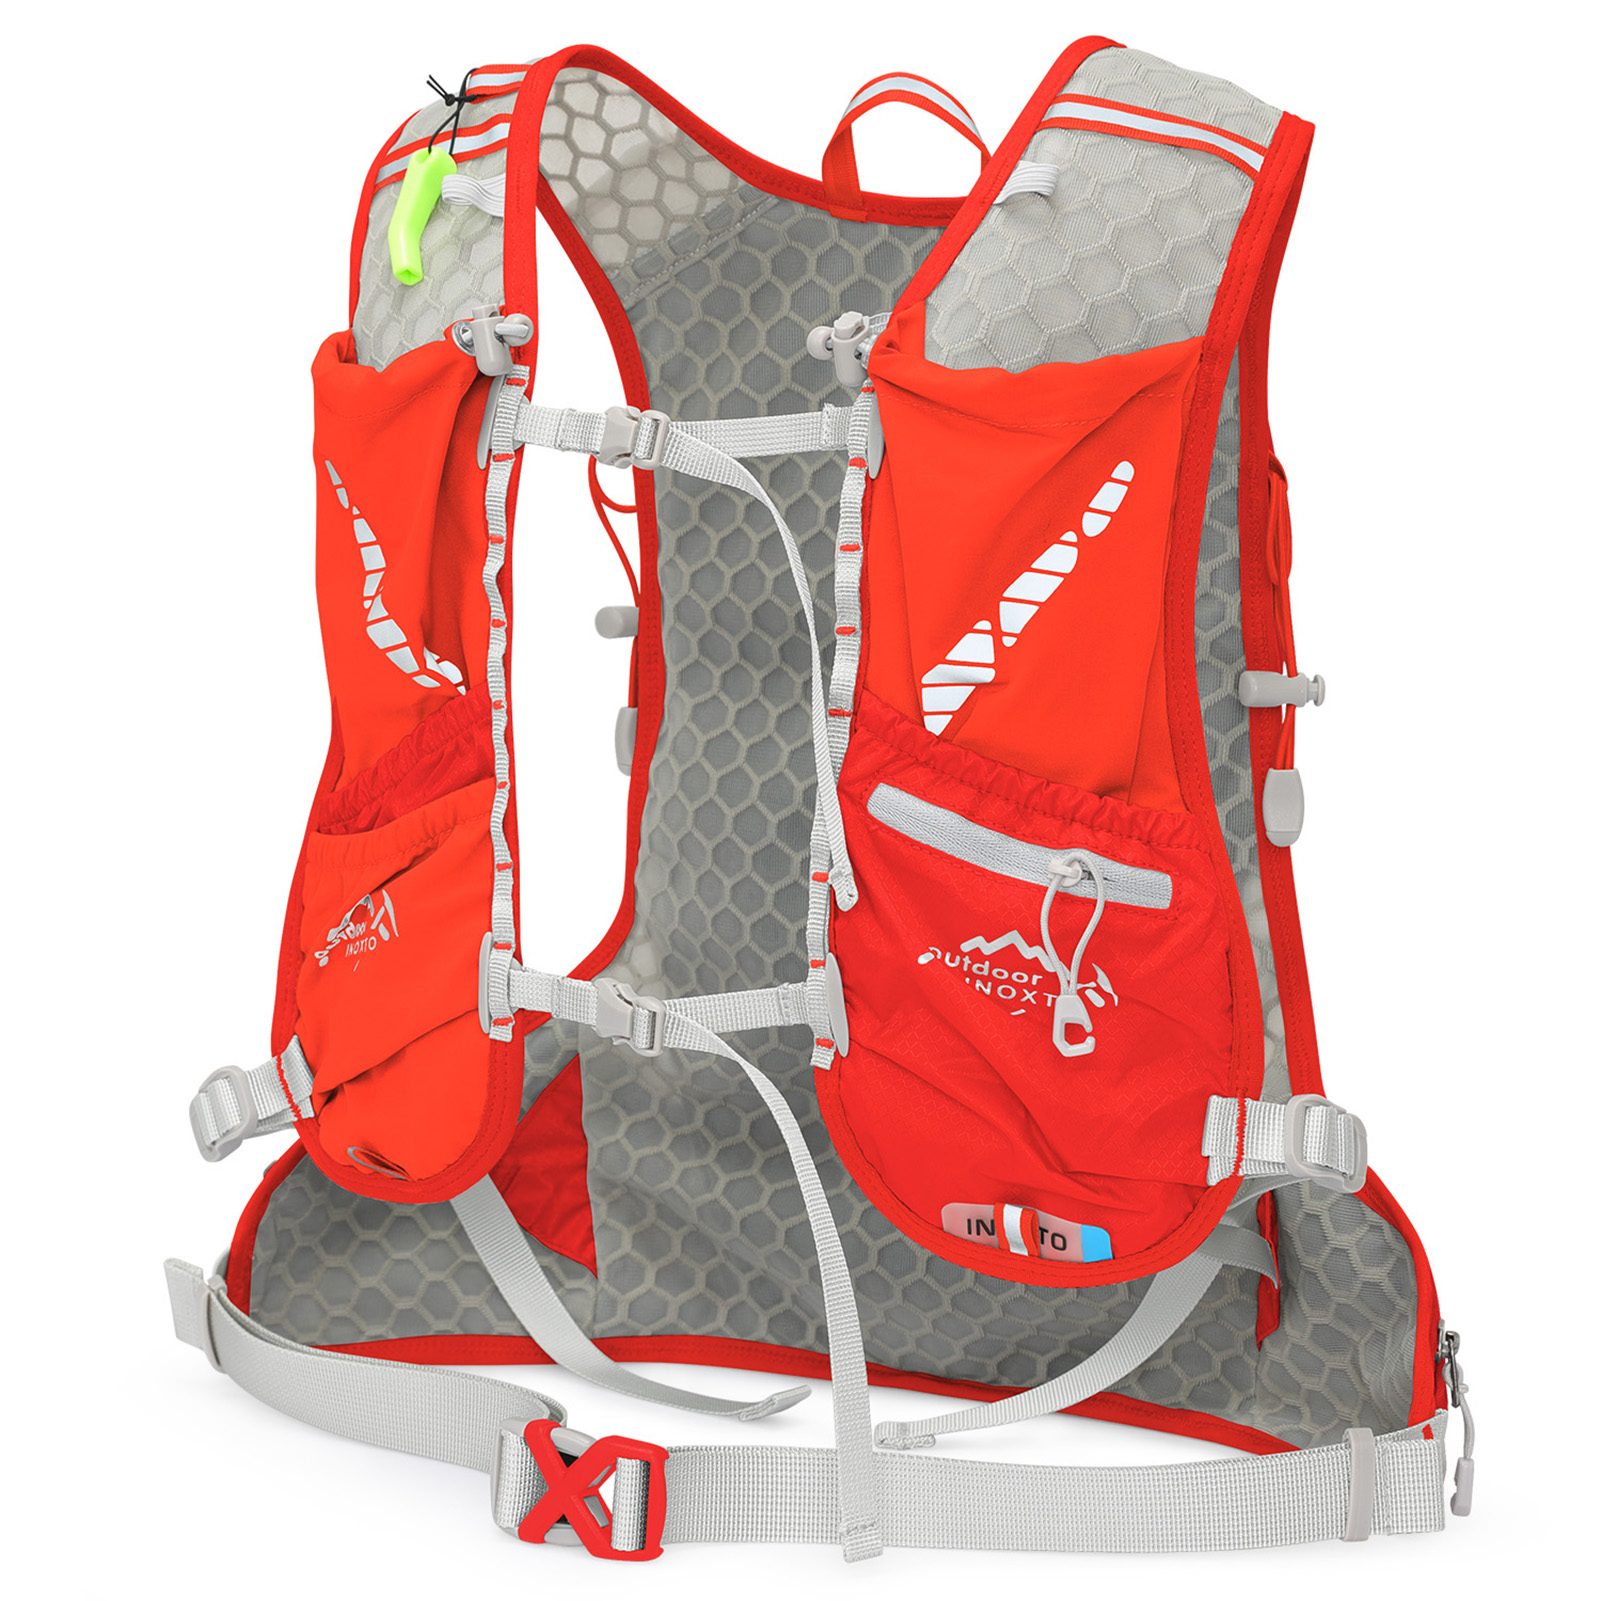 12L Cycling Hydration Lightweight Riding Vest Pack for Outdoor Running Camping Hiking Mountaineering - image 3 of 7